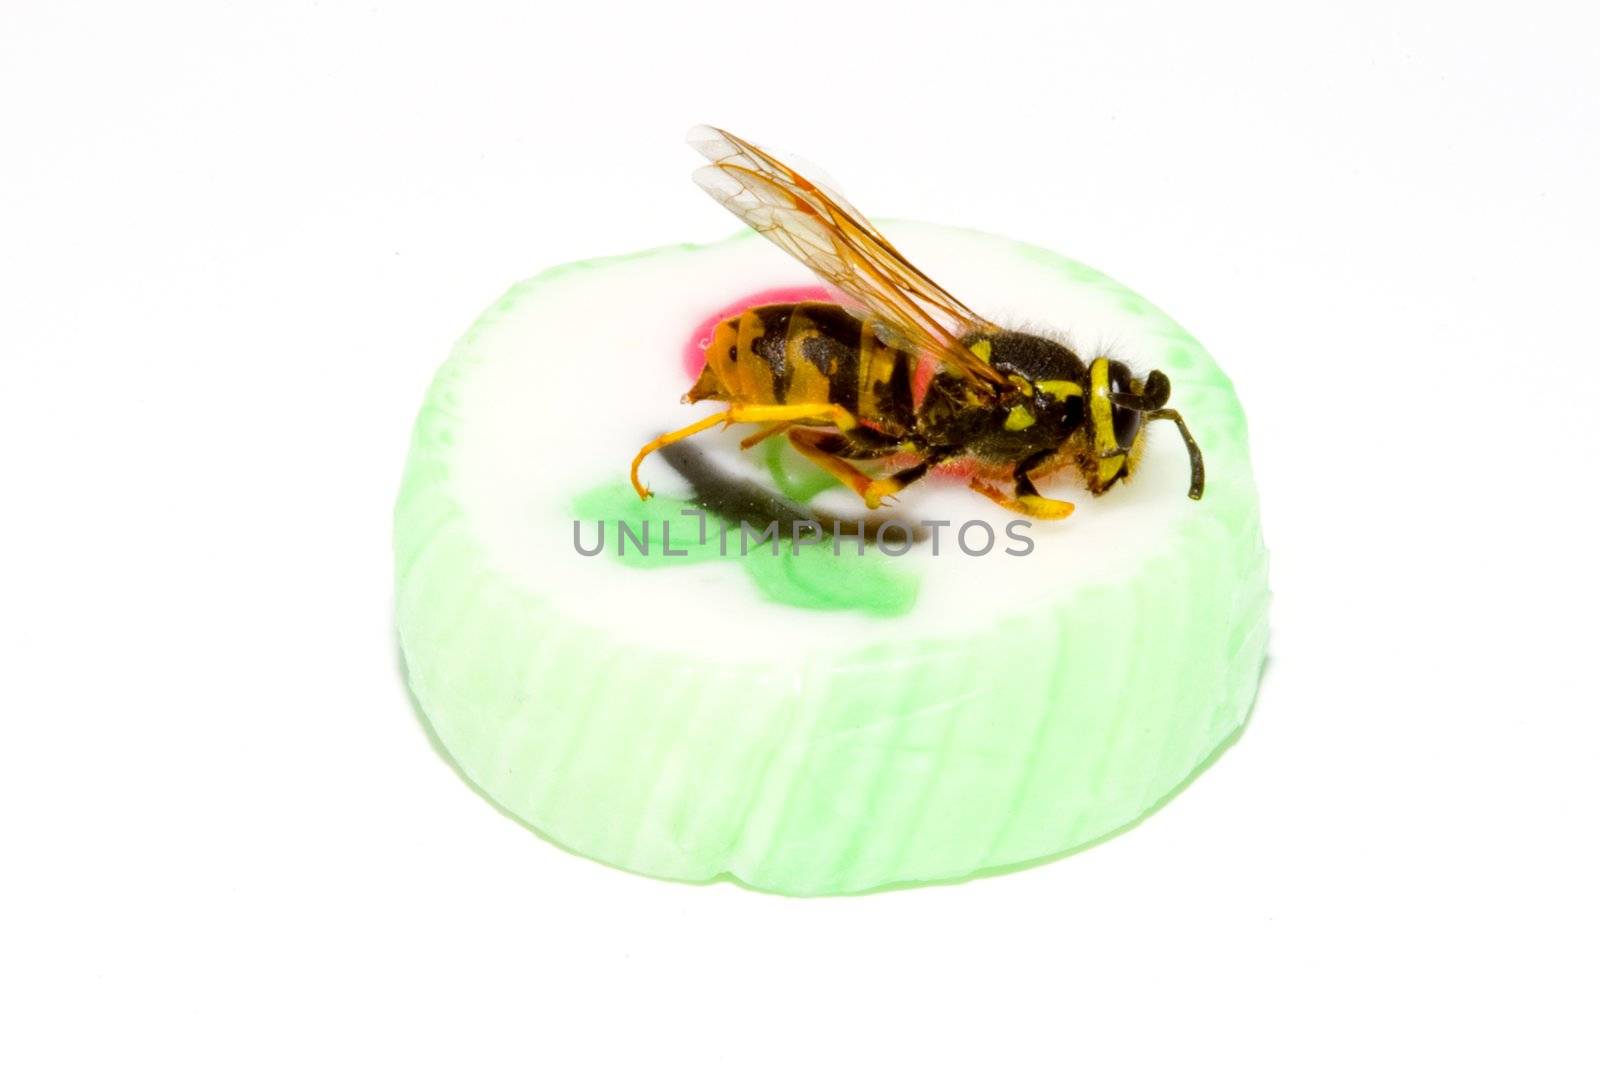 Wasp on a Candy by werg